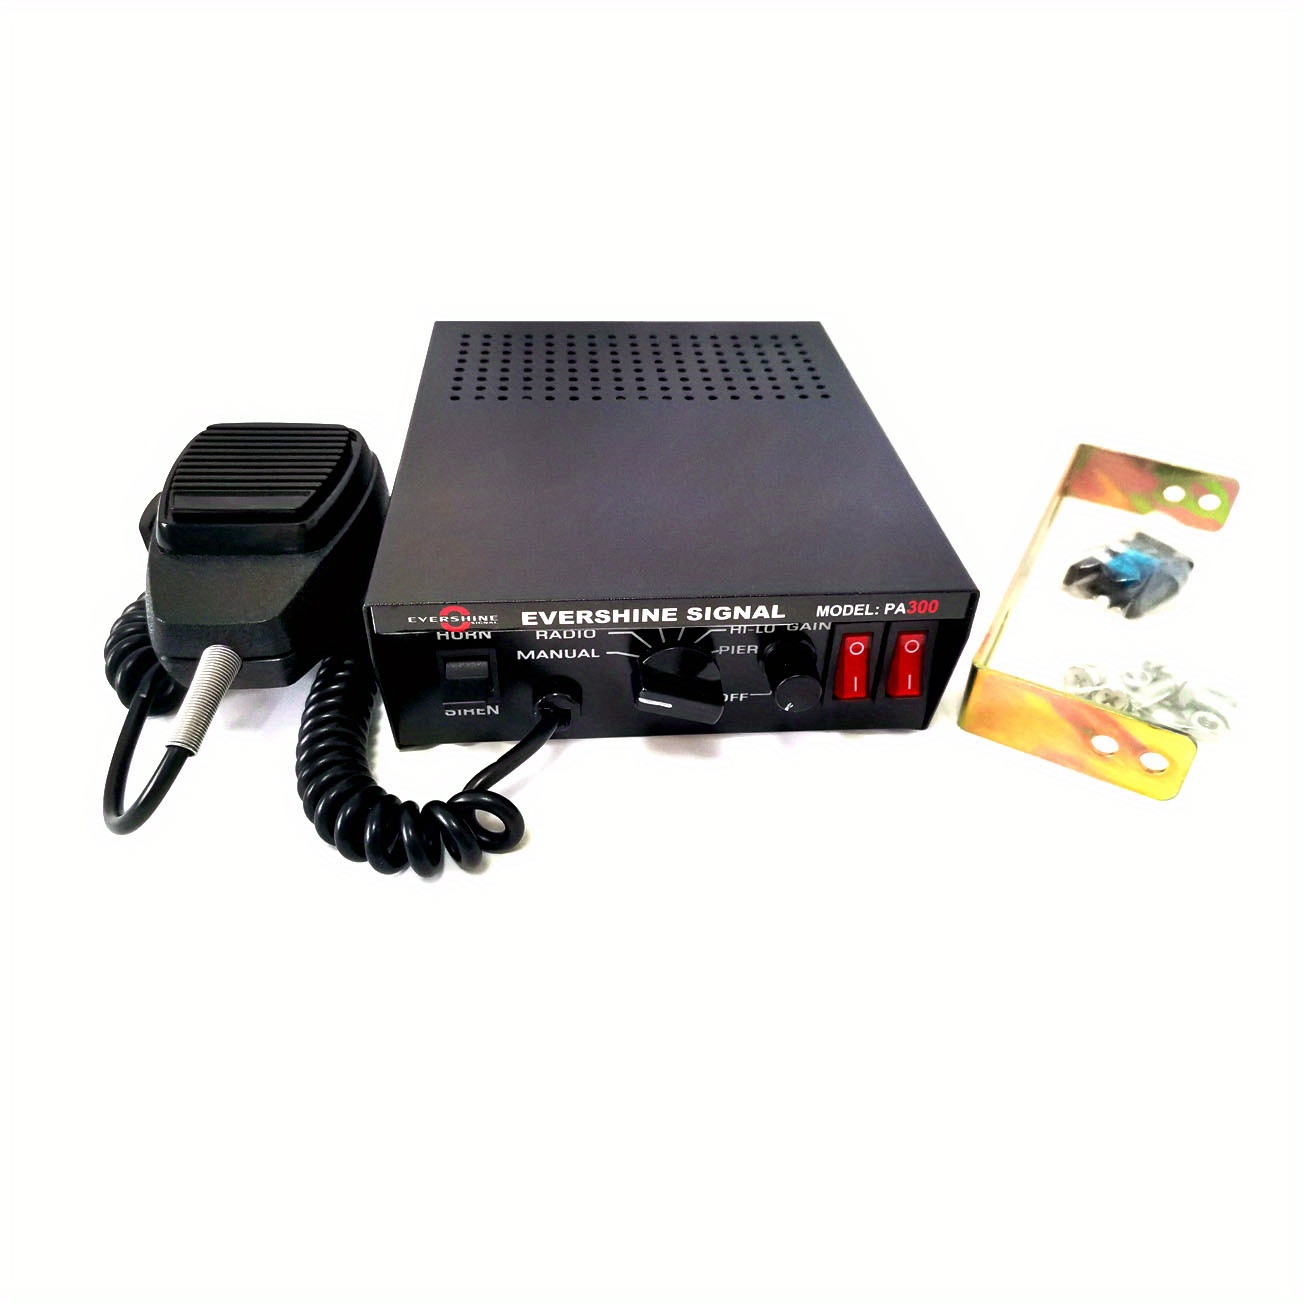 12V 200W Siren PA System with Handheld Microphone & Hands-Free 2X16A  Switches - Perfect for Emergency Warning Siren in Vehicles, Trucks, UTVs,  ATVs 